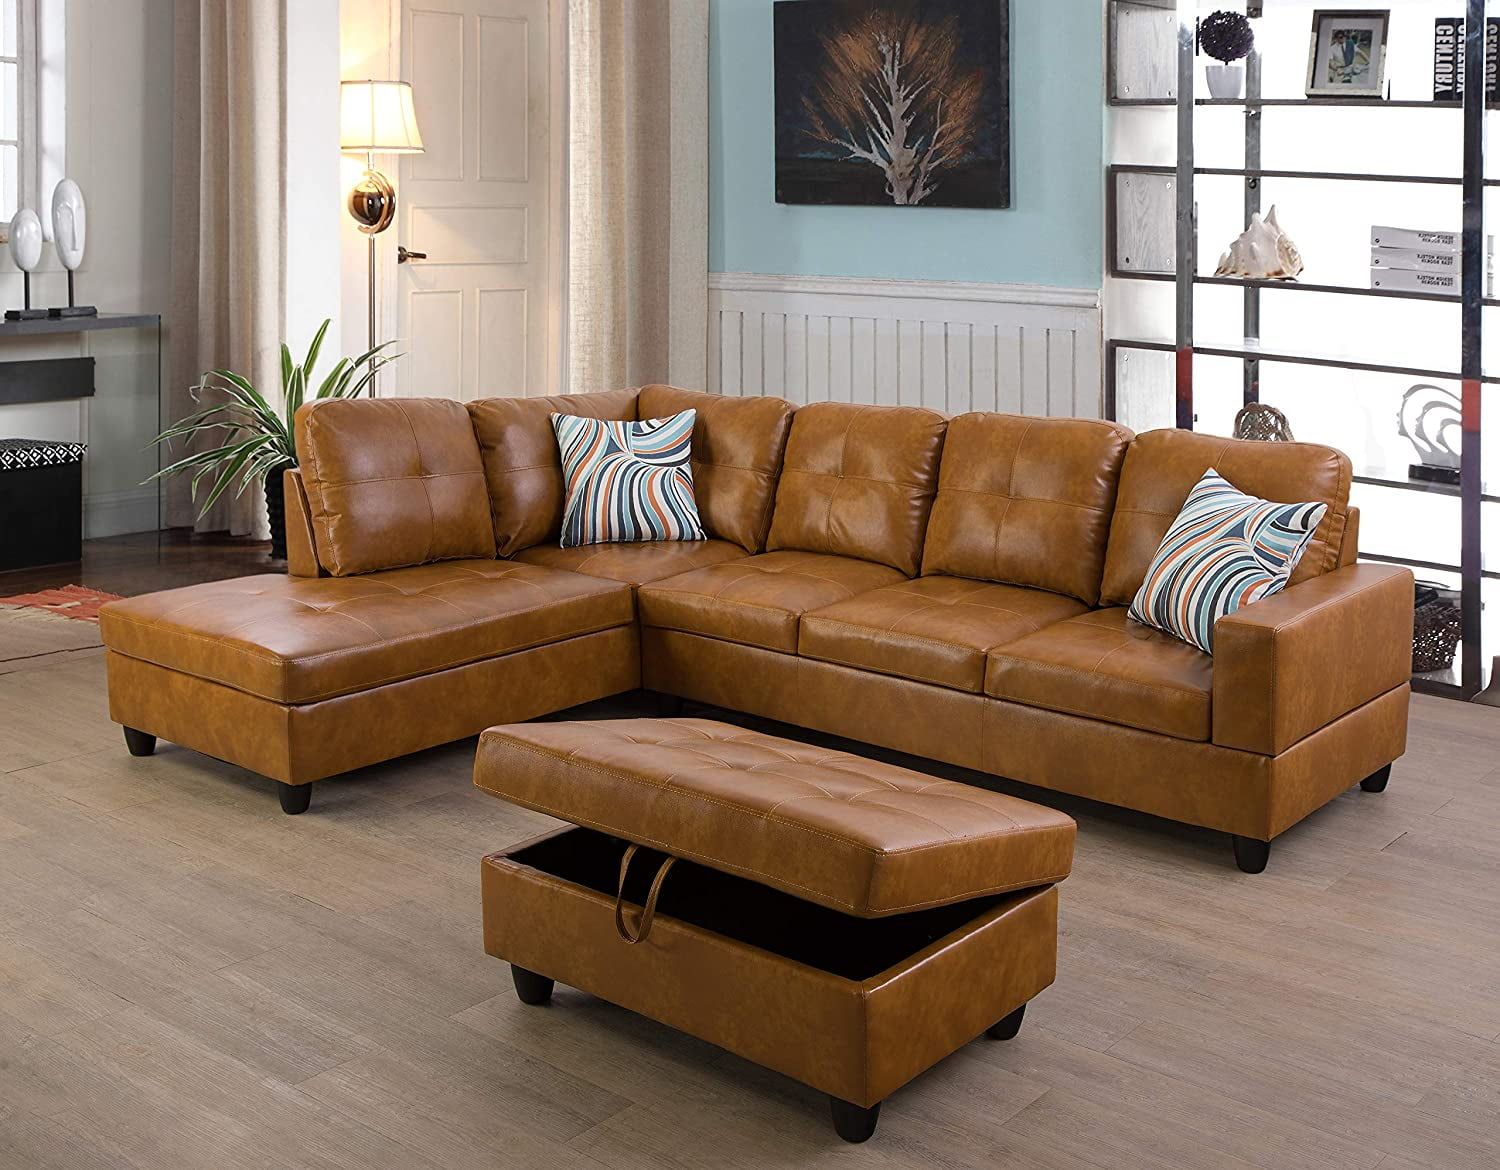 Ainehome Furniture Faux Leather Sectional Sofa Set, Cote Divoire | Ubuy For Faux Leather Sectional Sofa Sets (View 14 of 15)